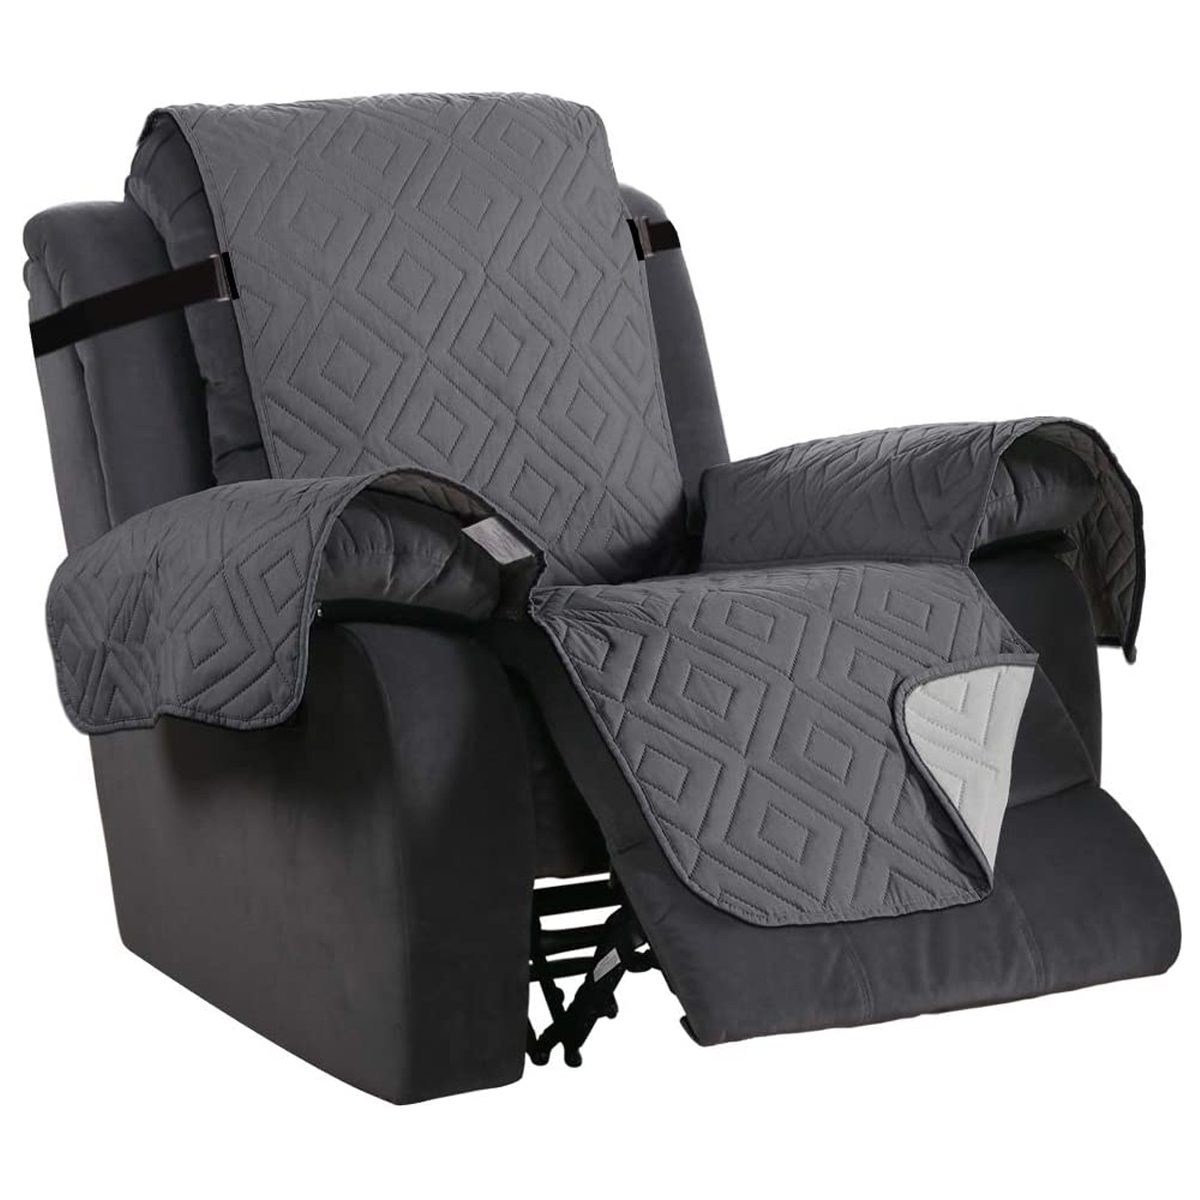 30-inch-Larger-Breathable-Waterproof-Wear-Resisting-Double-Sided-Available-Polyester-Recliner-Chair--1813077-2